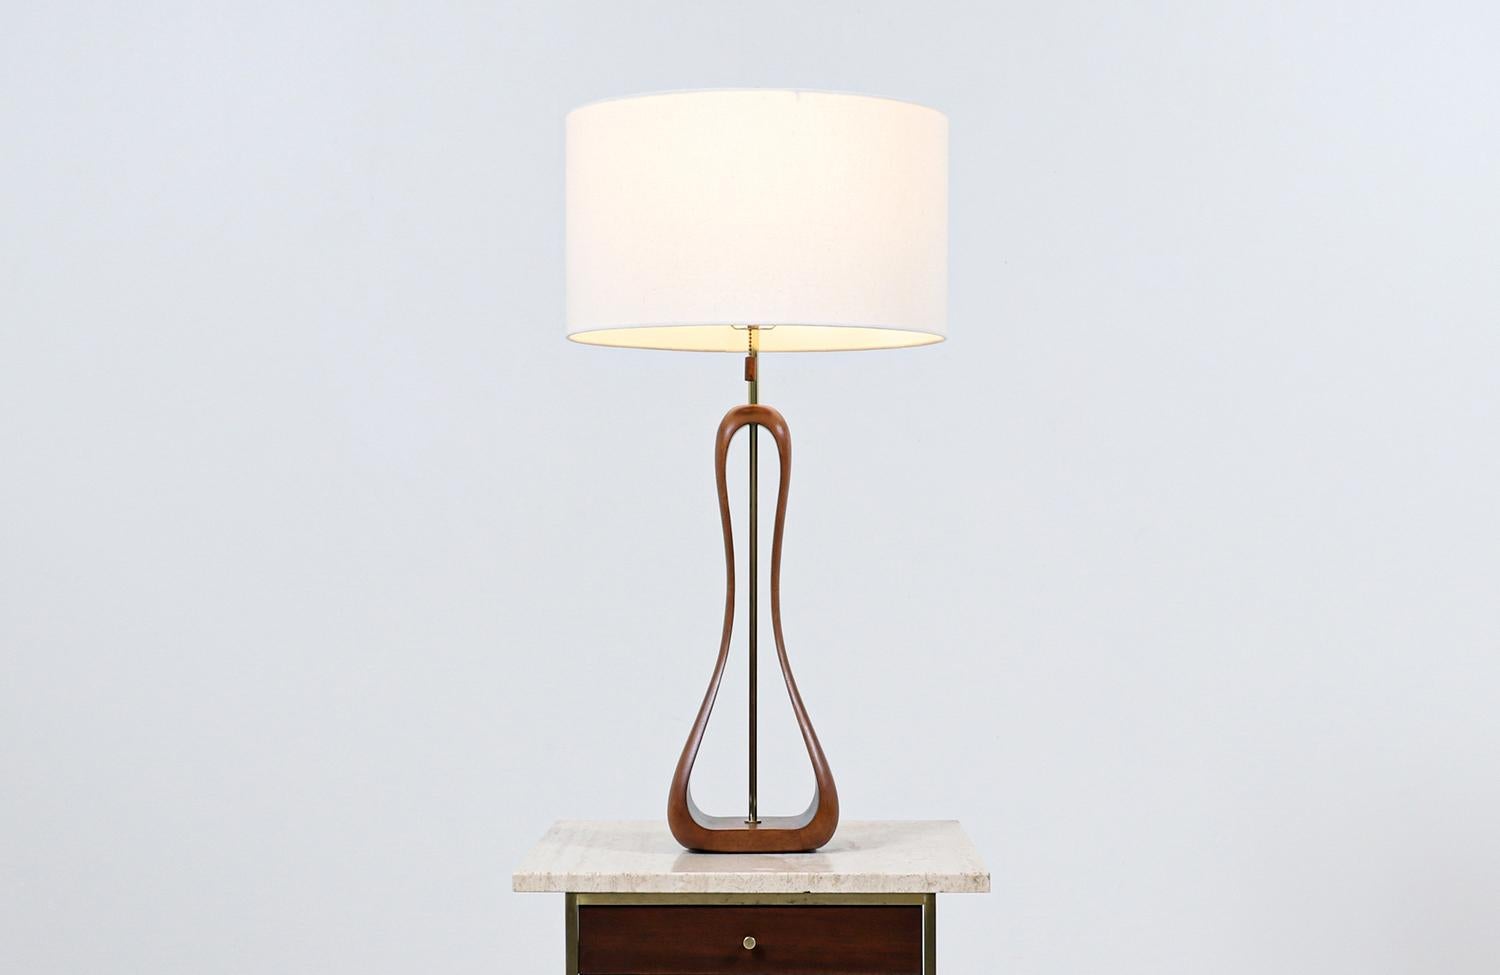 Dimensions:
33.50in H x 7.50in W x 5.50in D

Lamp shade:
10in H x 17in W x 17in D.

_______________________________________________________________

Transforming a piece of Mid-Century Modern furniture is like bringing history back to life, and we